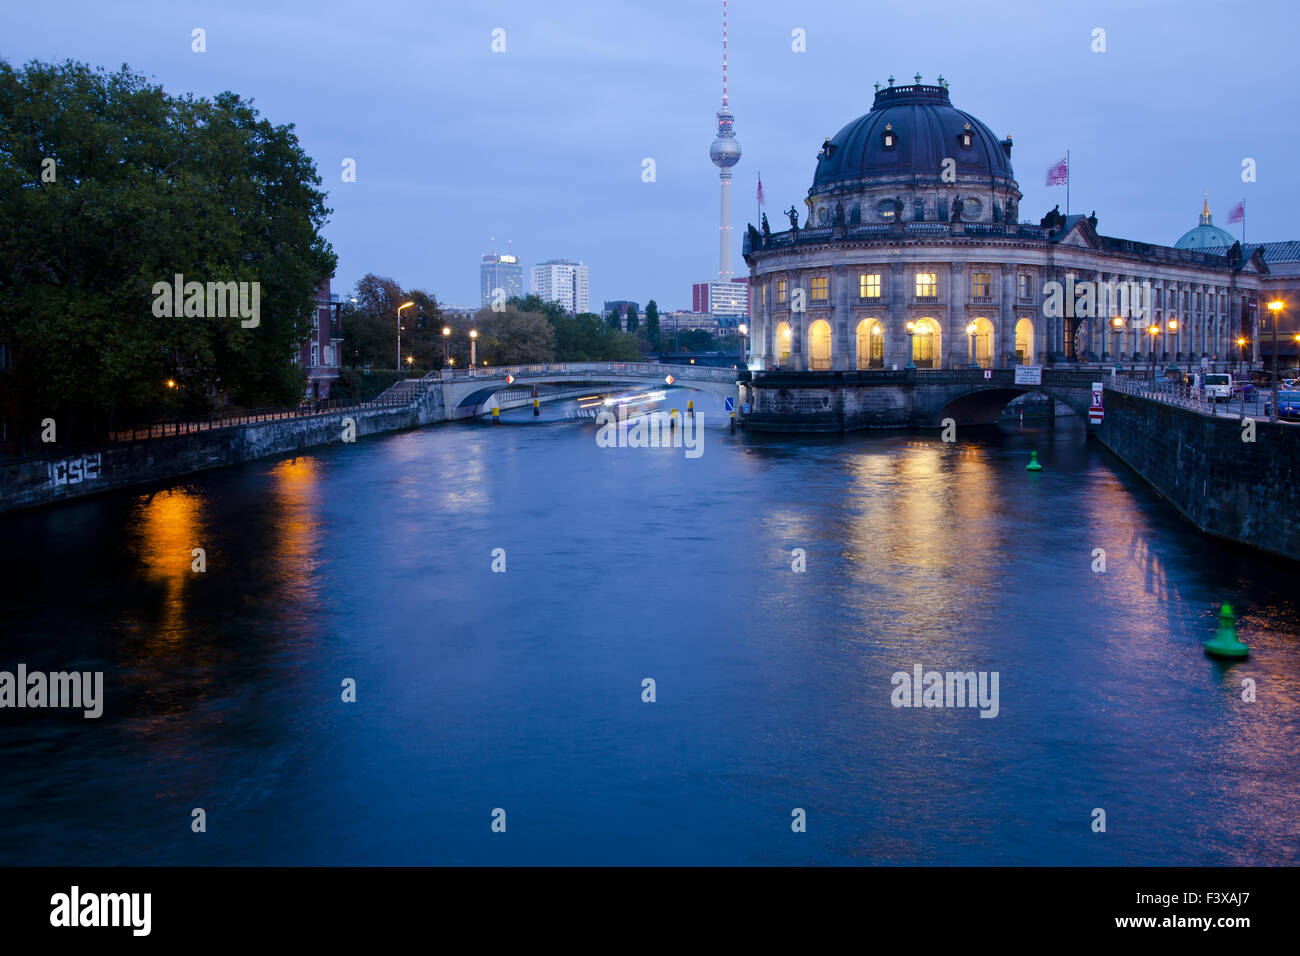 The Bode Museum Stock Photo